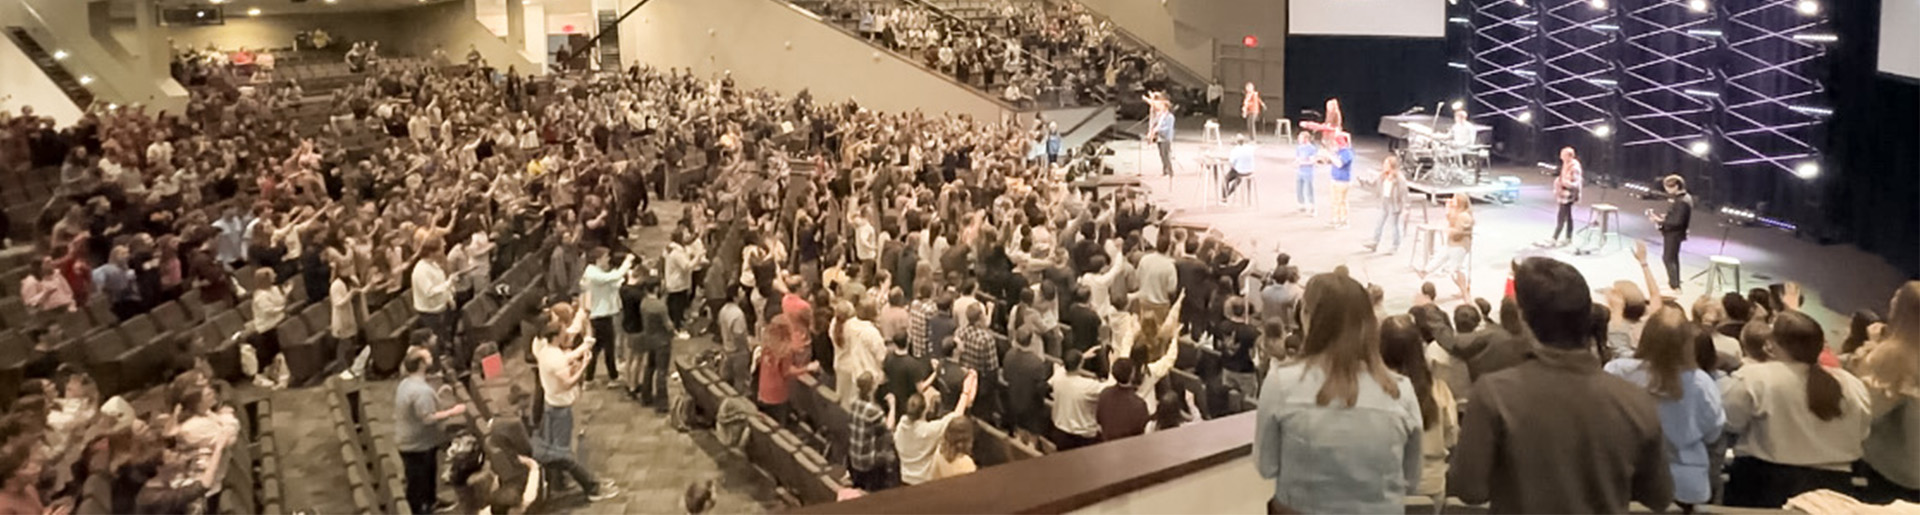 A landscape shot of students worshipping during chapel at Cedarville University.